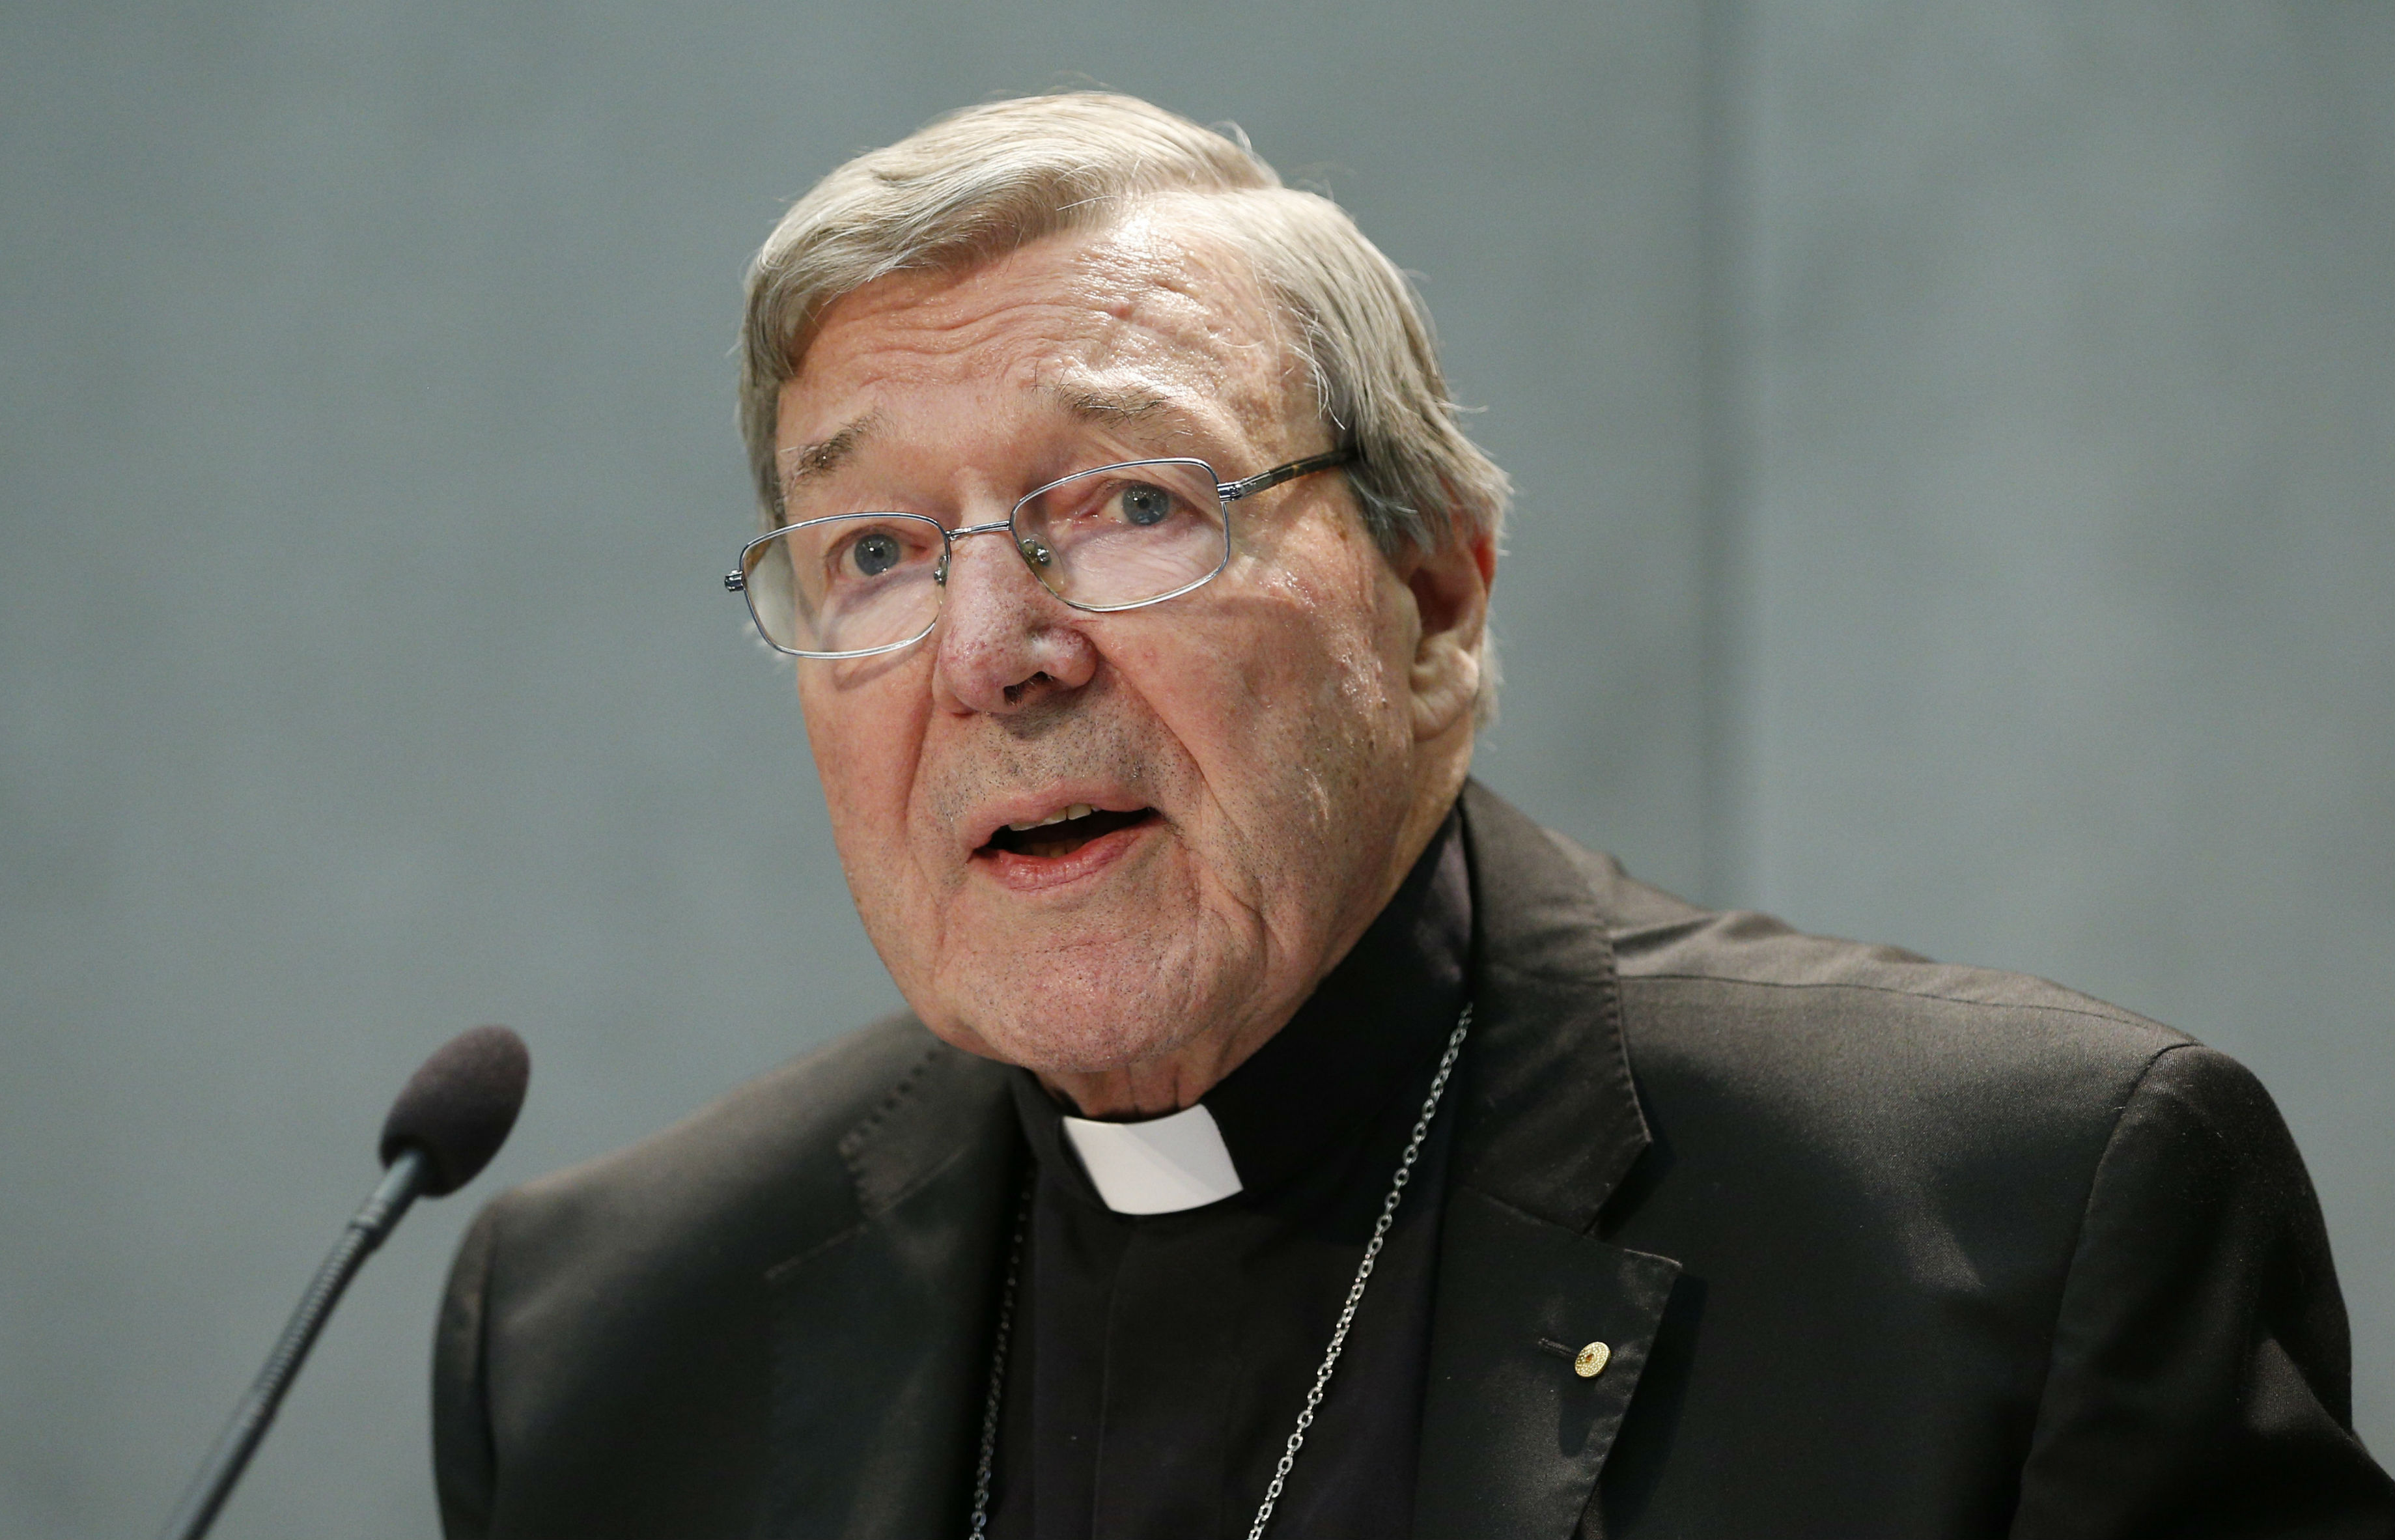 Details of charges made against Cardinal Pell will not be known until court hearing